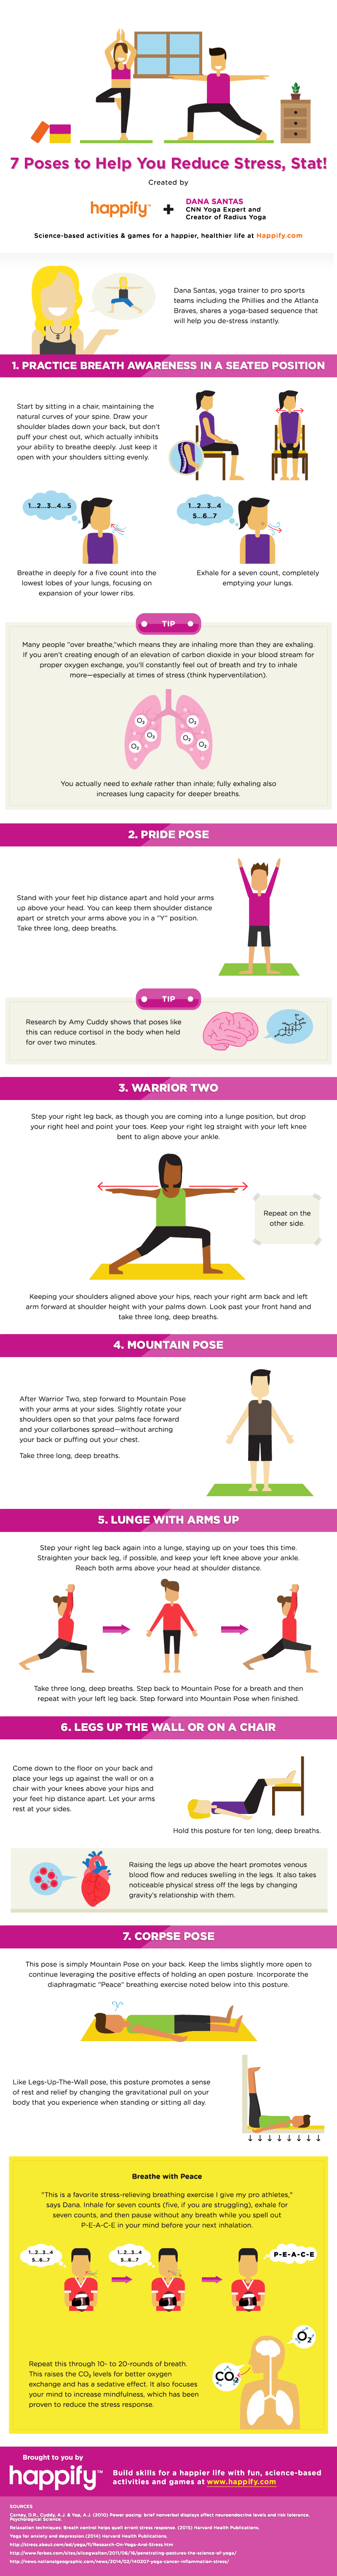 7 Exercises for Reducing Stress (Infographic)